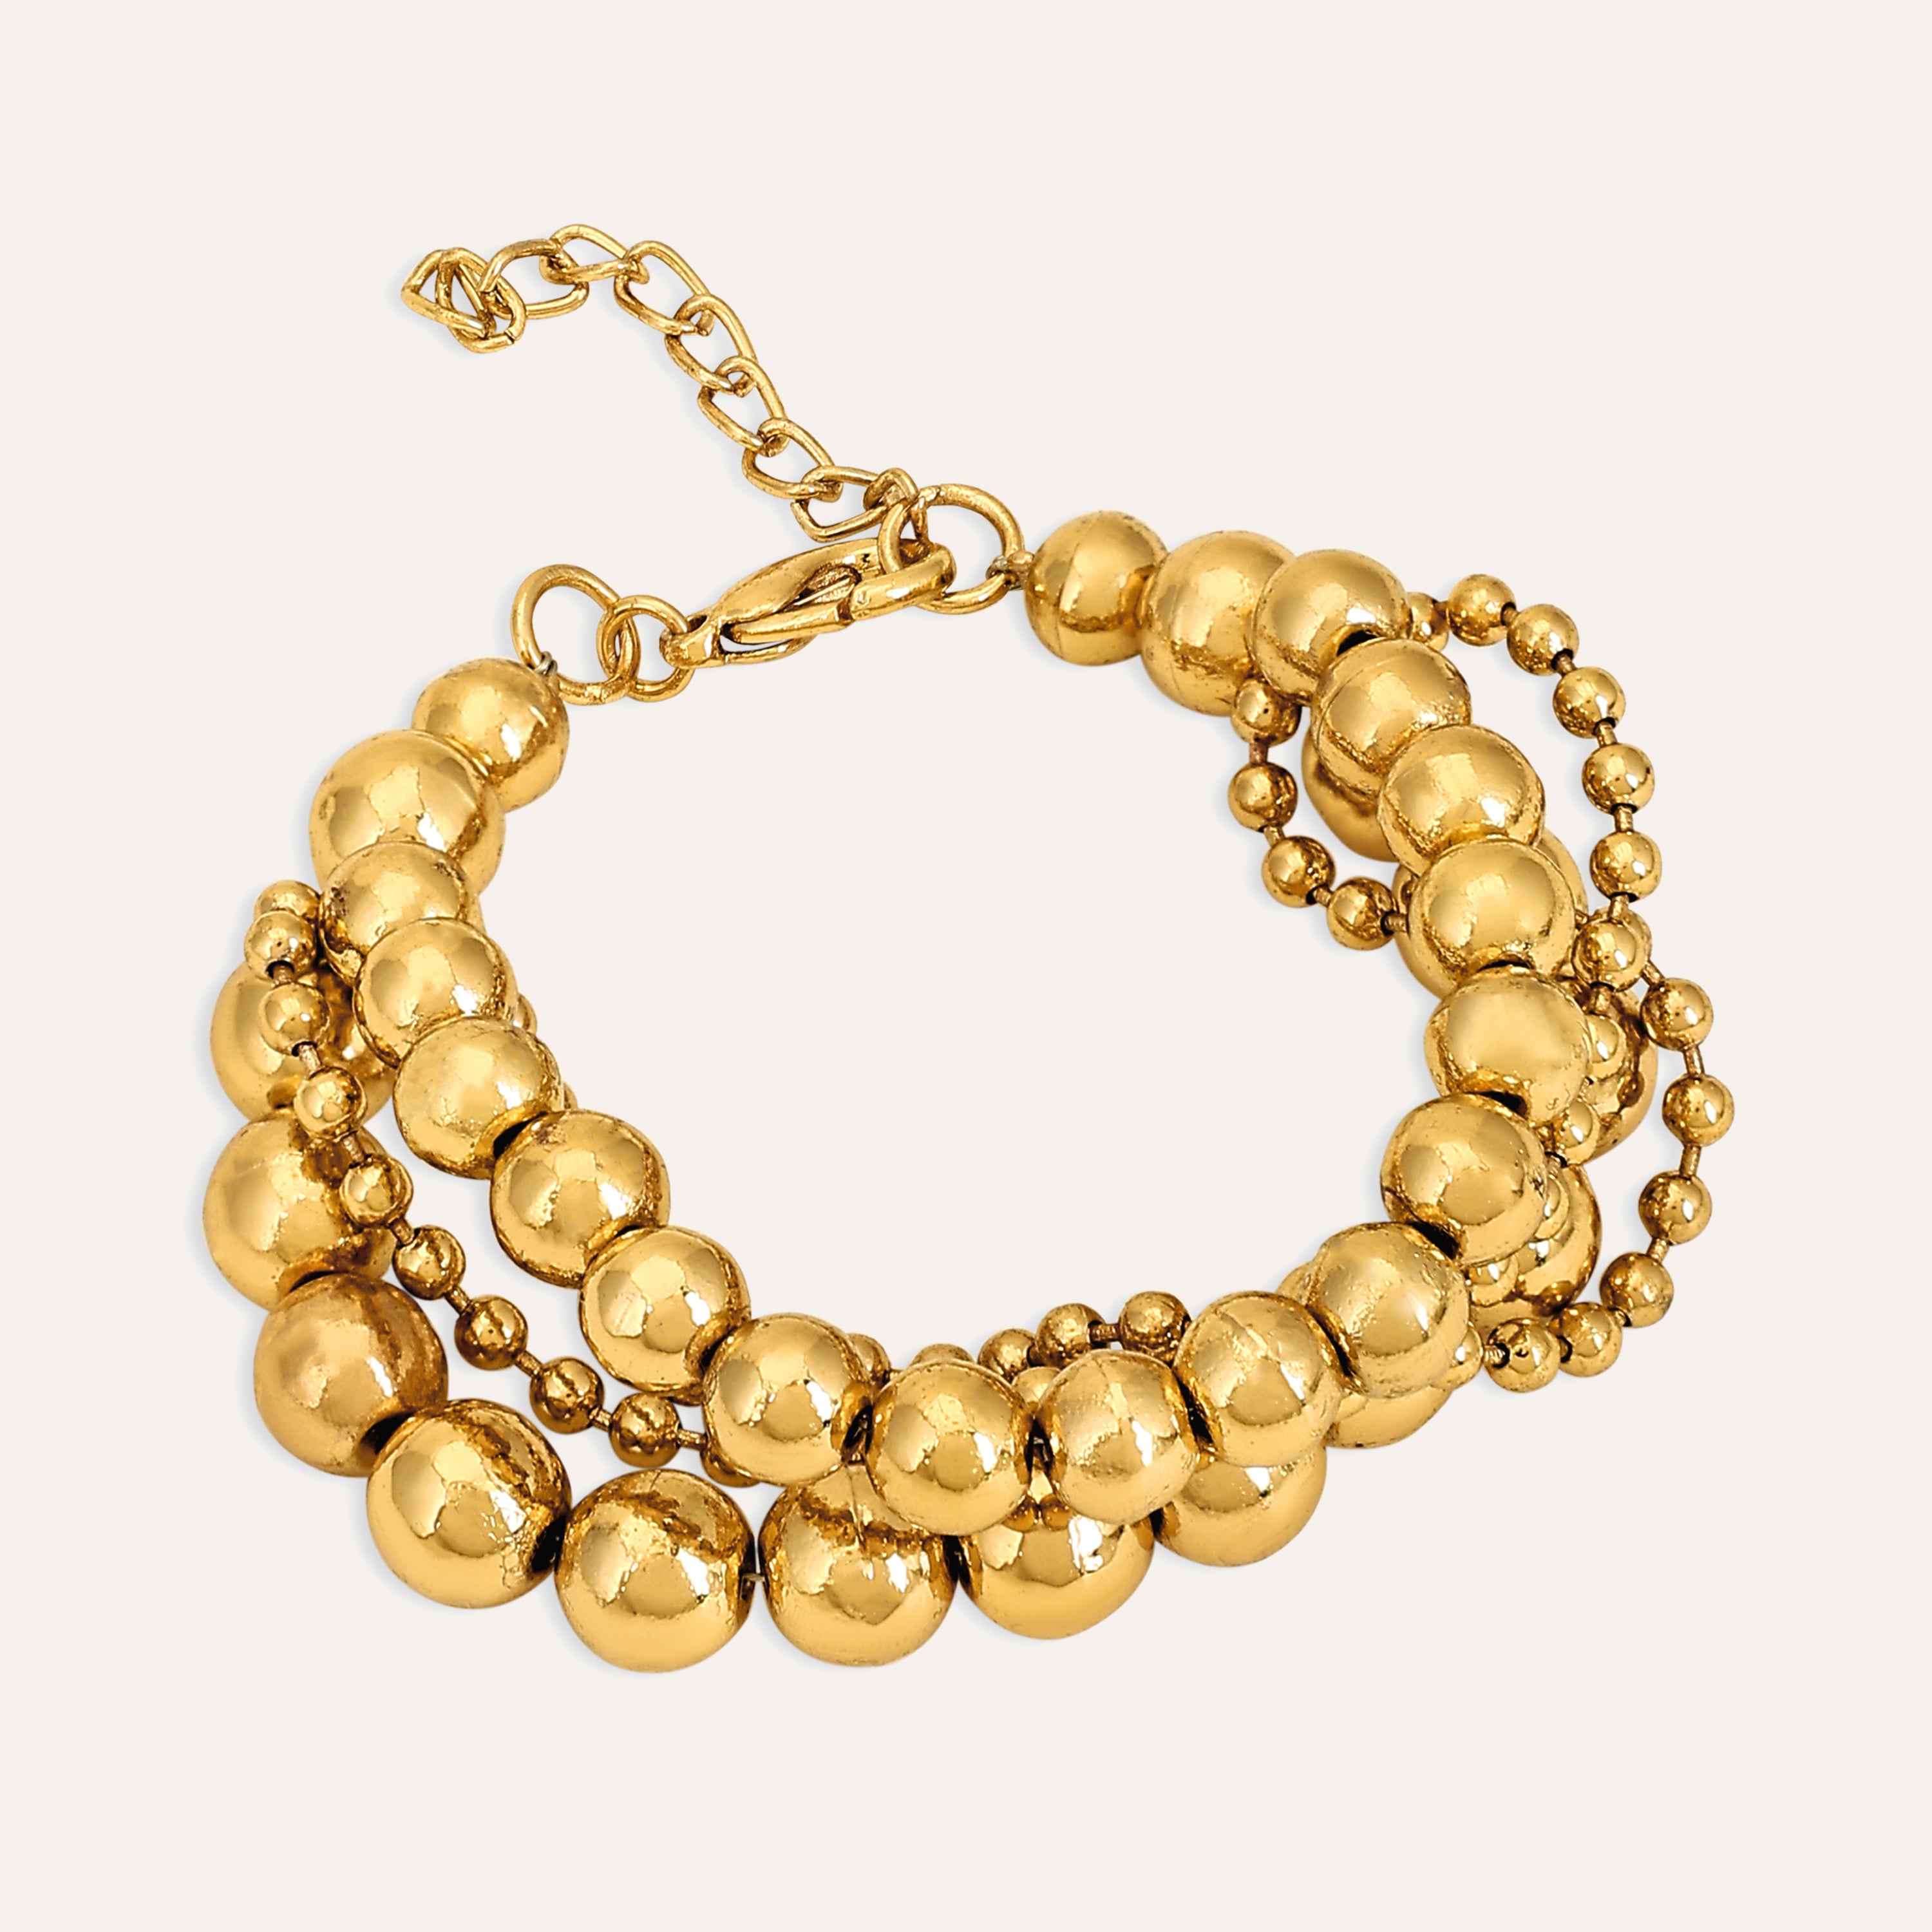 TFC Bold Beads Gold Plated Bracelet Stack-Discover our stunning collection of stylish bracelets for women, featuring exquisite pearl bracelets, handcrafted beaded bracelets, and elegant gold-plated designs. Enjoy cheapest anti-tarnish fashion jewellery and long-lasting brilliance only at The Fun Company.